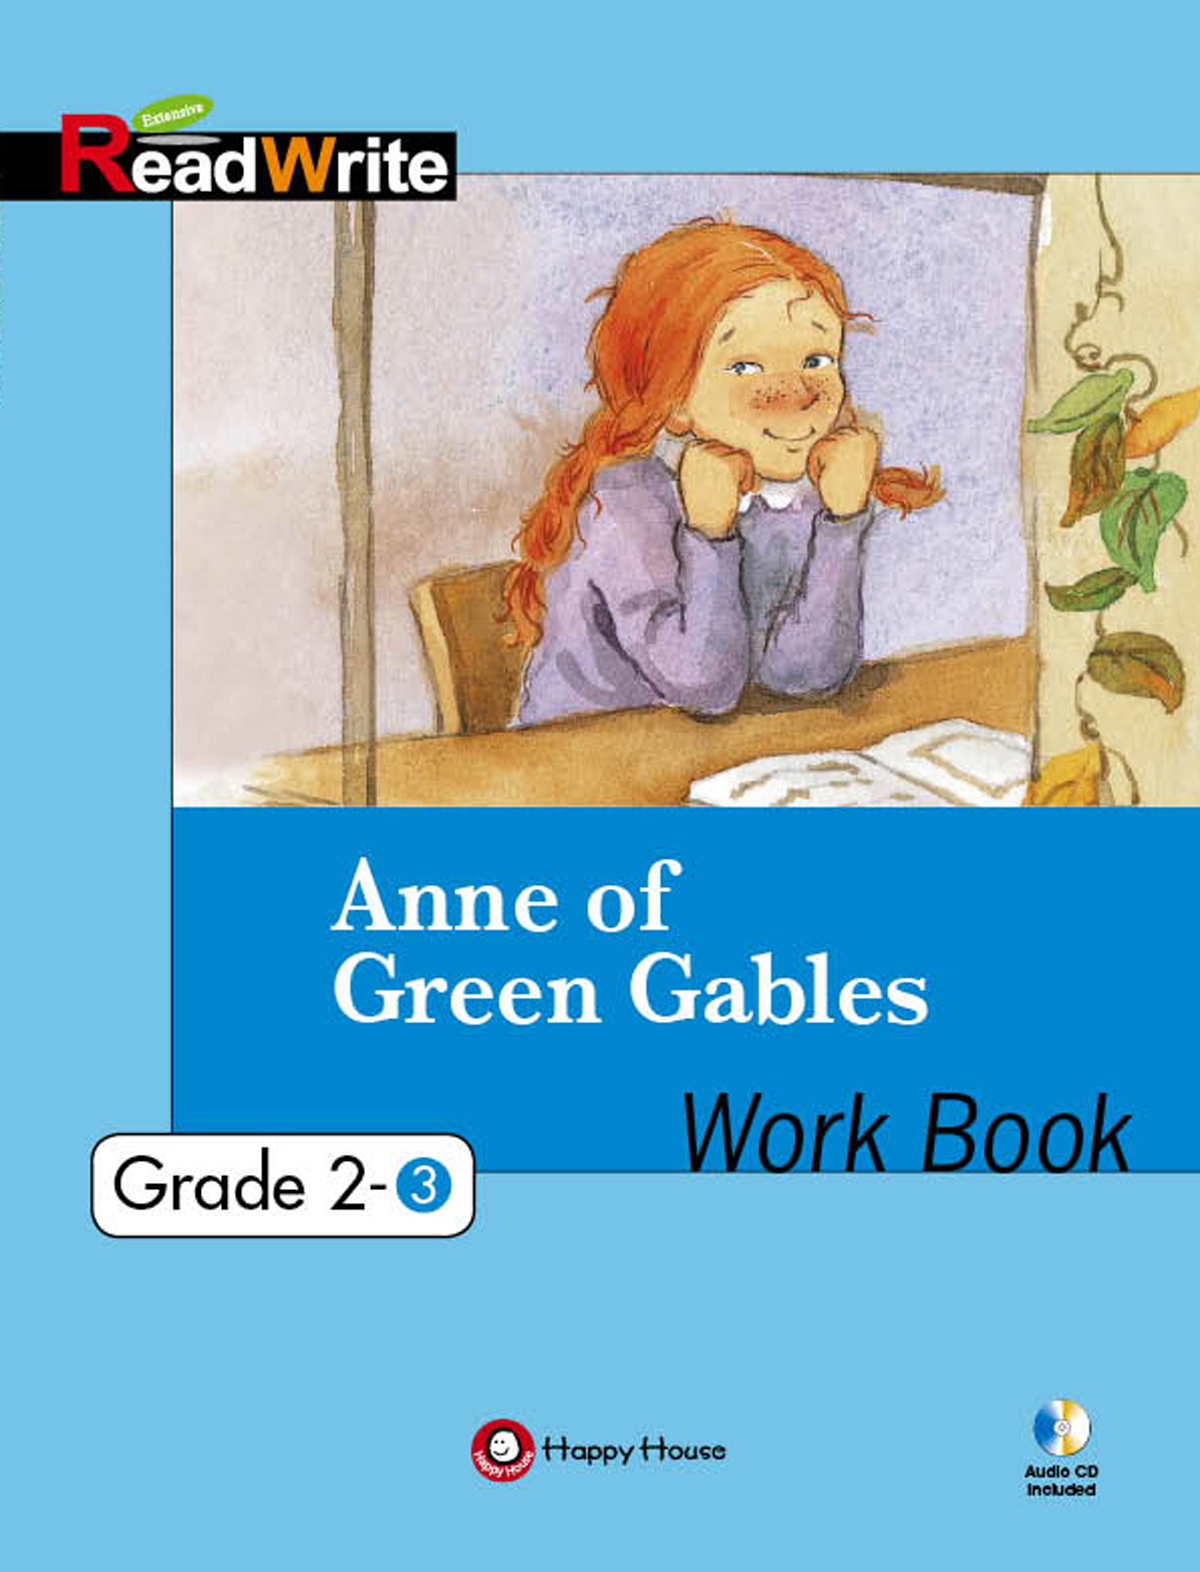 [Extensive ReadWrite] Anne of the Green Gables